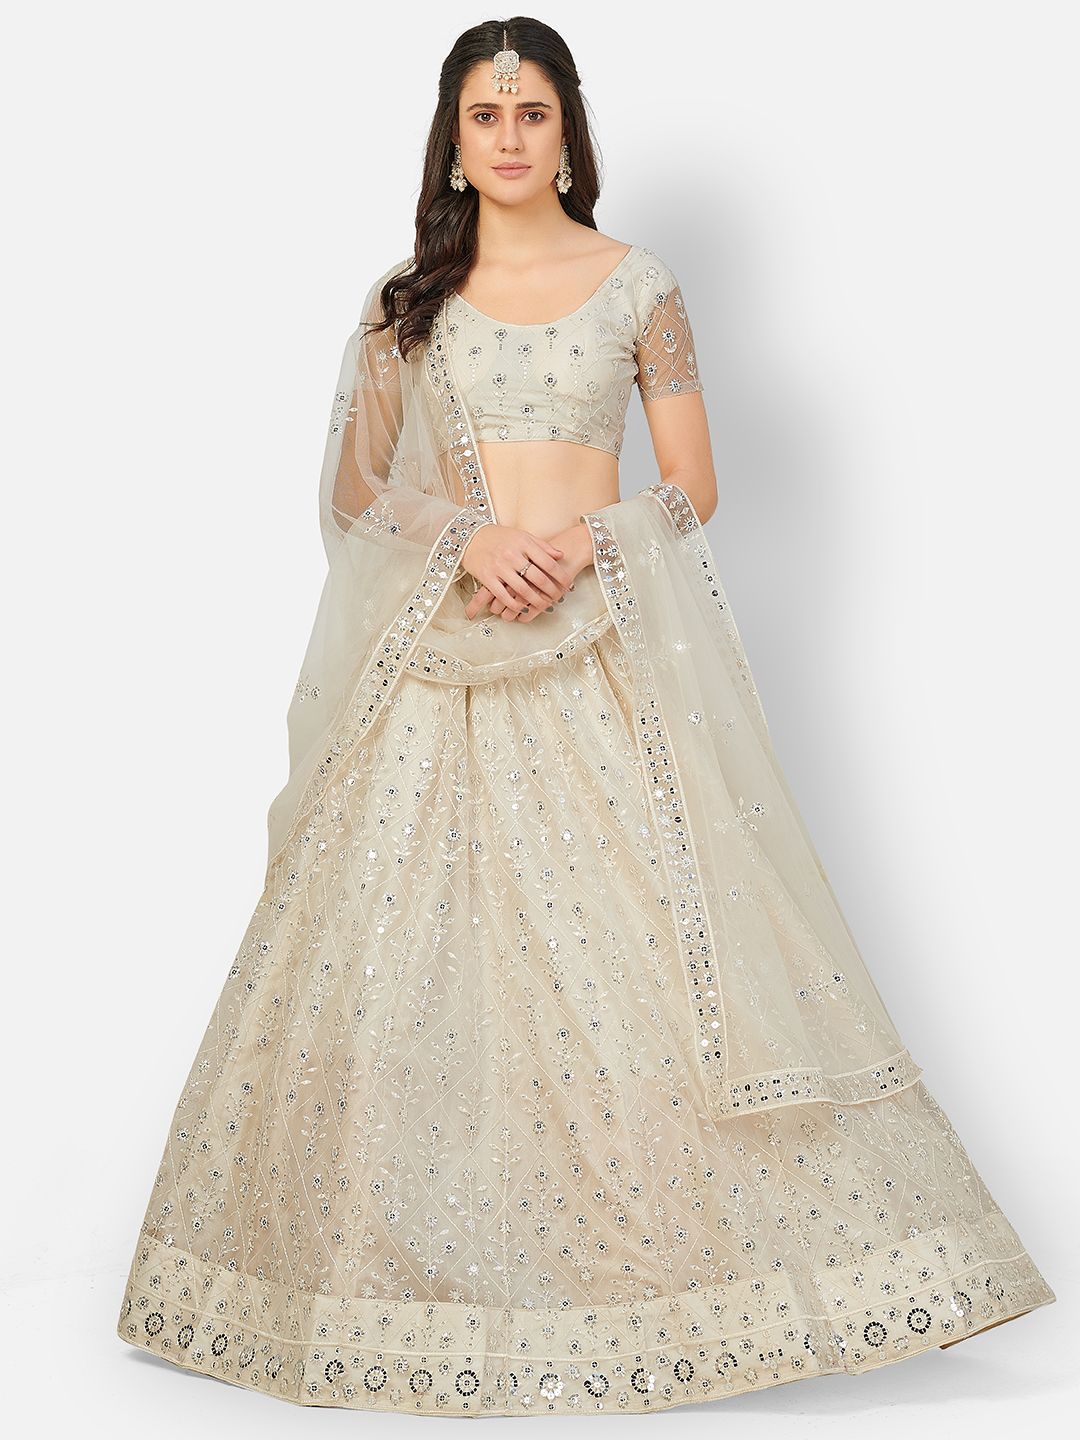 SHOPGARB Off White & Silver-Toned Embroidered Semi-Stitched Lehenga & Unstitched Blouse Price in India